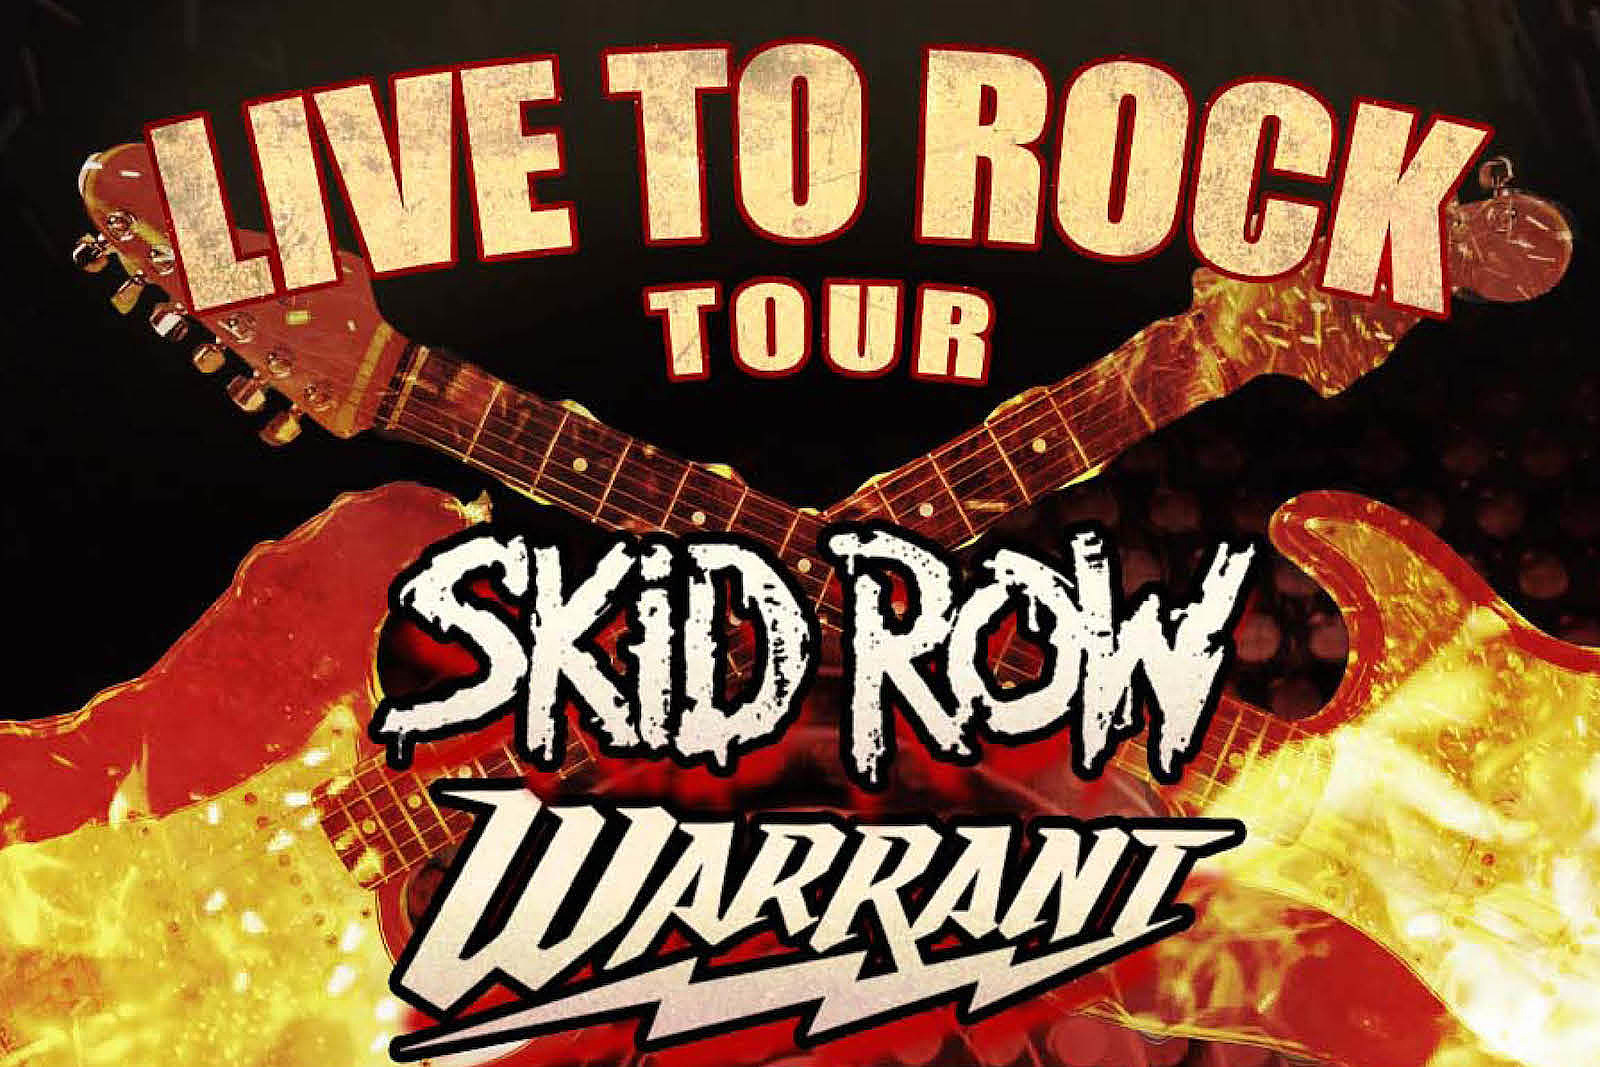 Skid Row and Warrant co-headline the Live to Rock Tour with support from classic 1980s "hair metal" artists including Quiet Riot, Winger, and Lita Ford